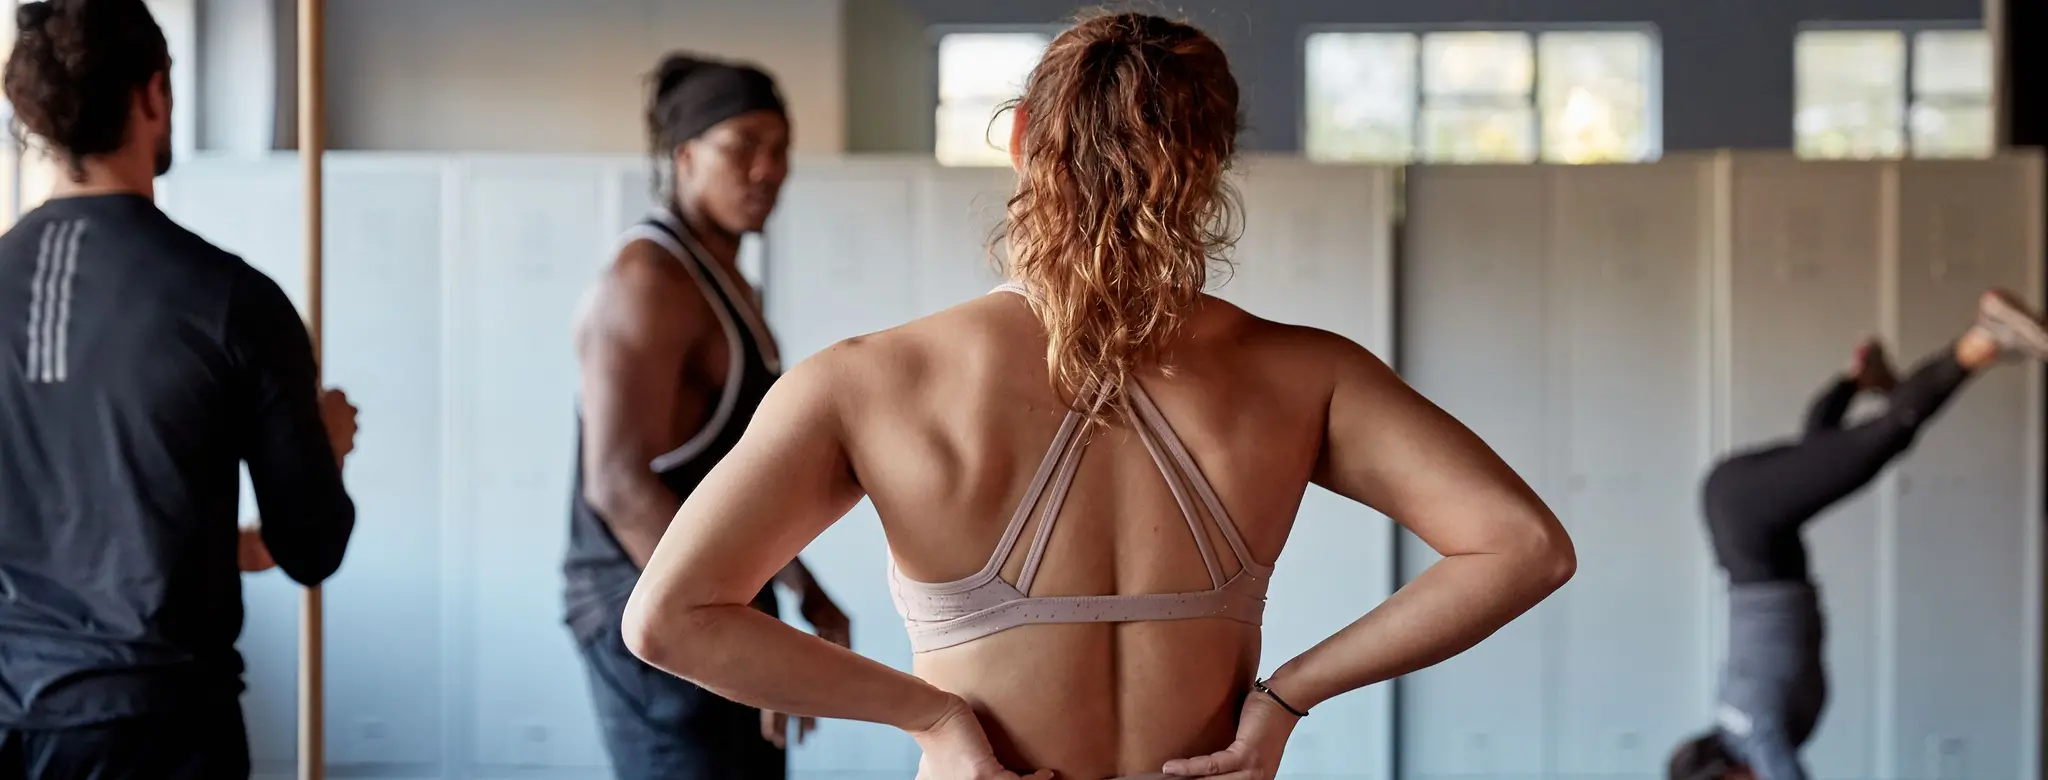 Summer Slump? How Fitness Studios Can Keep Members Engaged All Year Long Mindbody